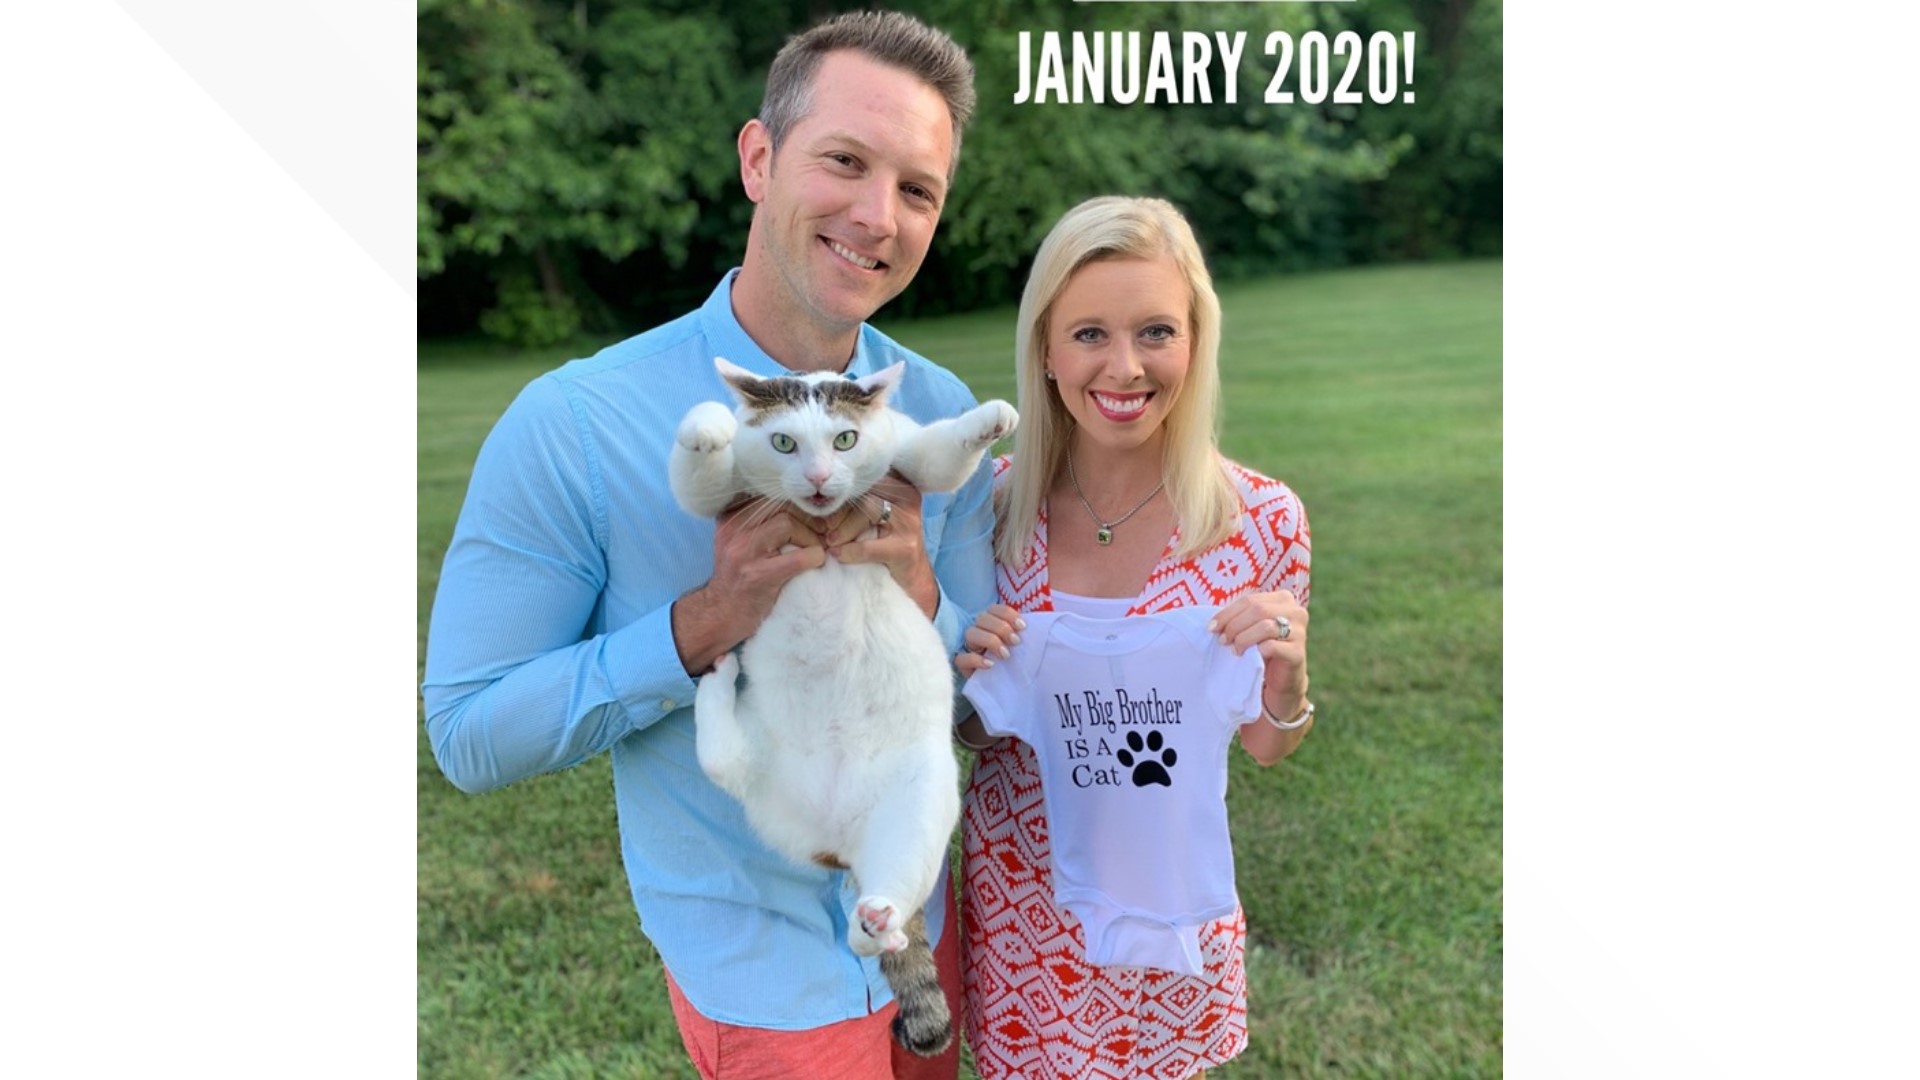 Oh, baby! Team 2 is growing. Good Morning Show anchor Meghann Mollerus and her husband Trevor are expecting their first child in January 2020!